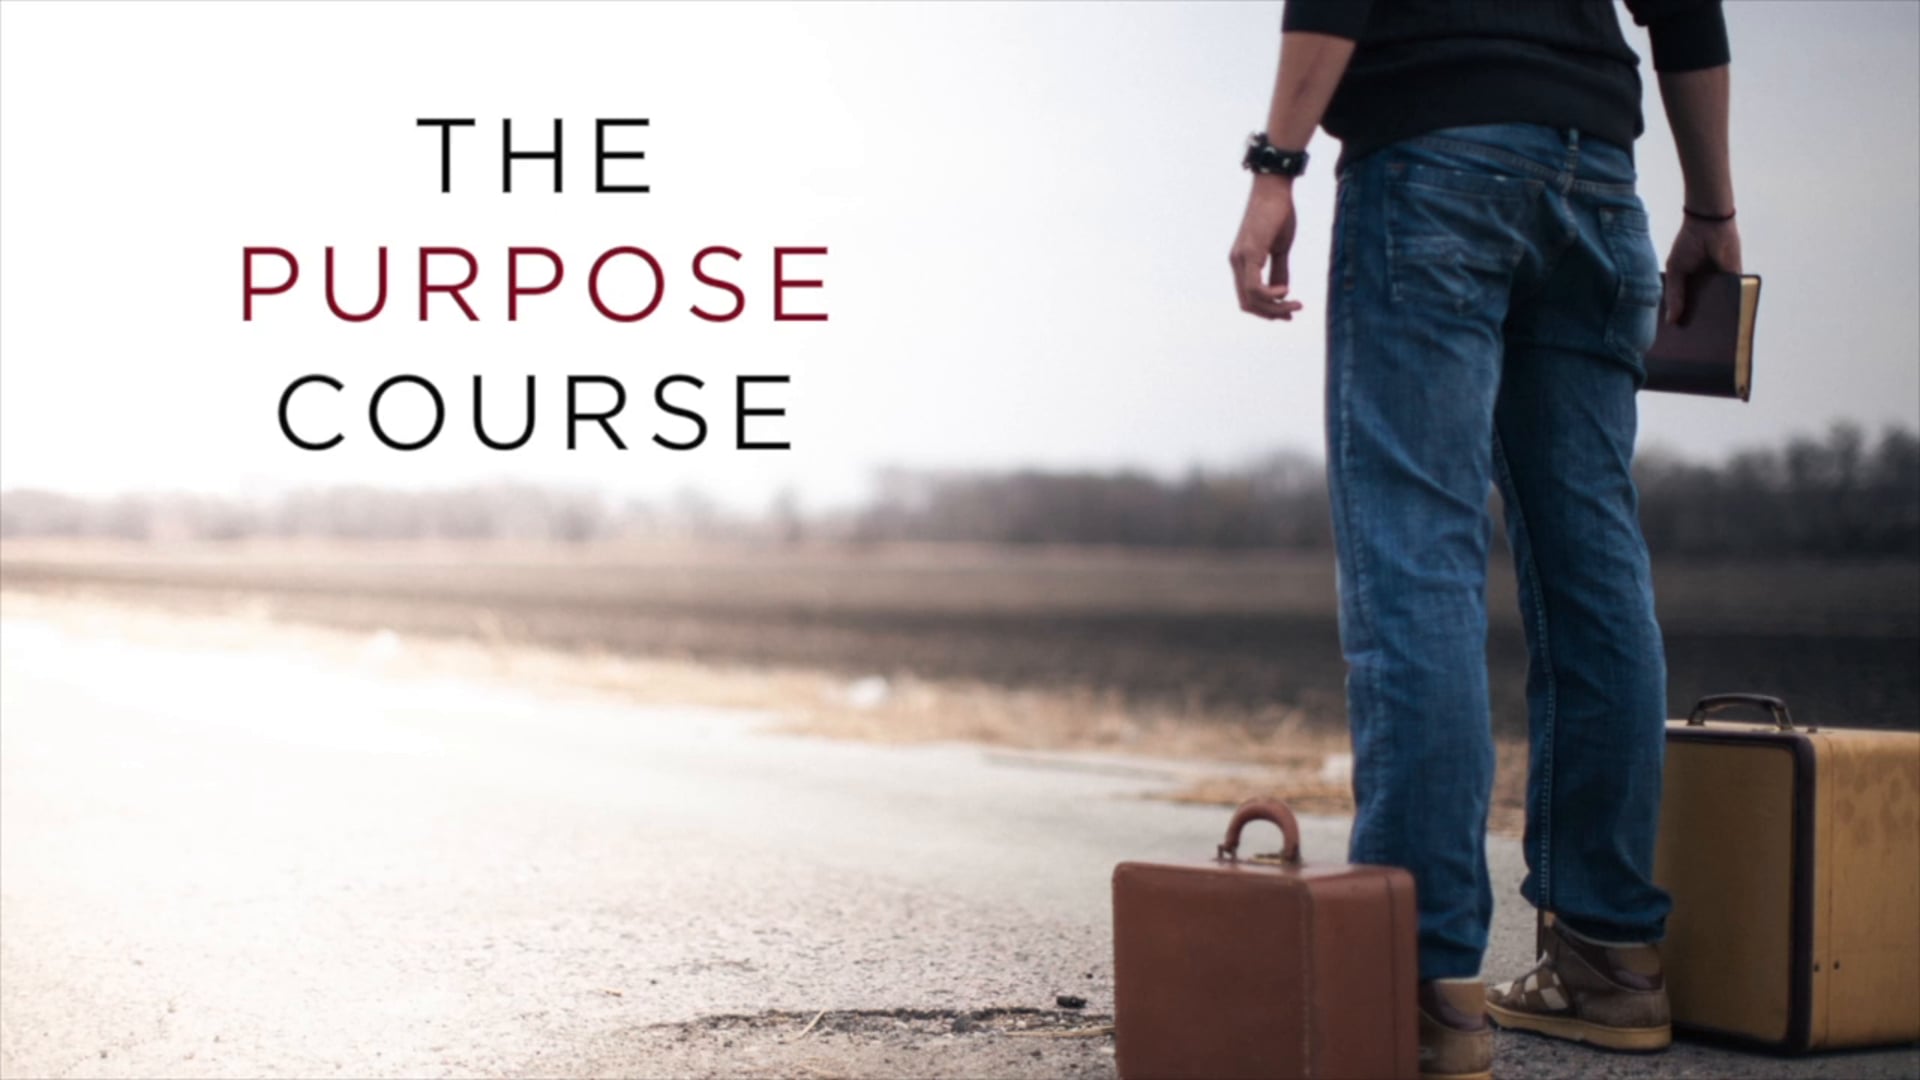 The Purpose Course 5 - ASK